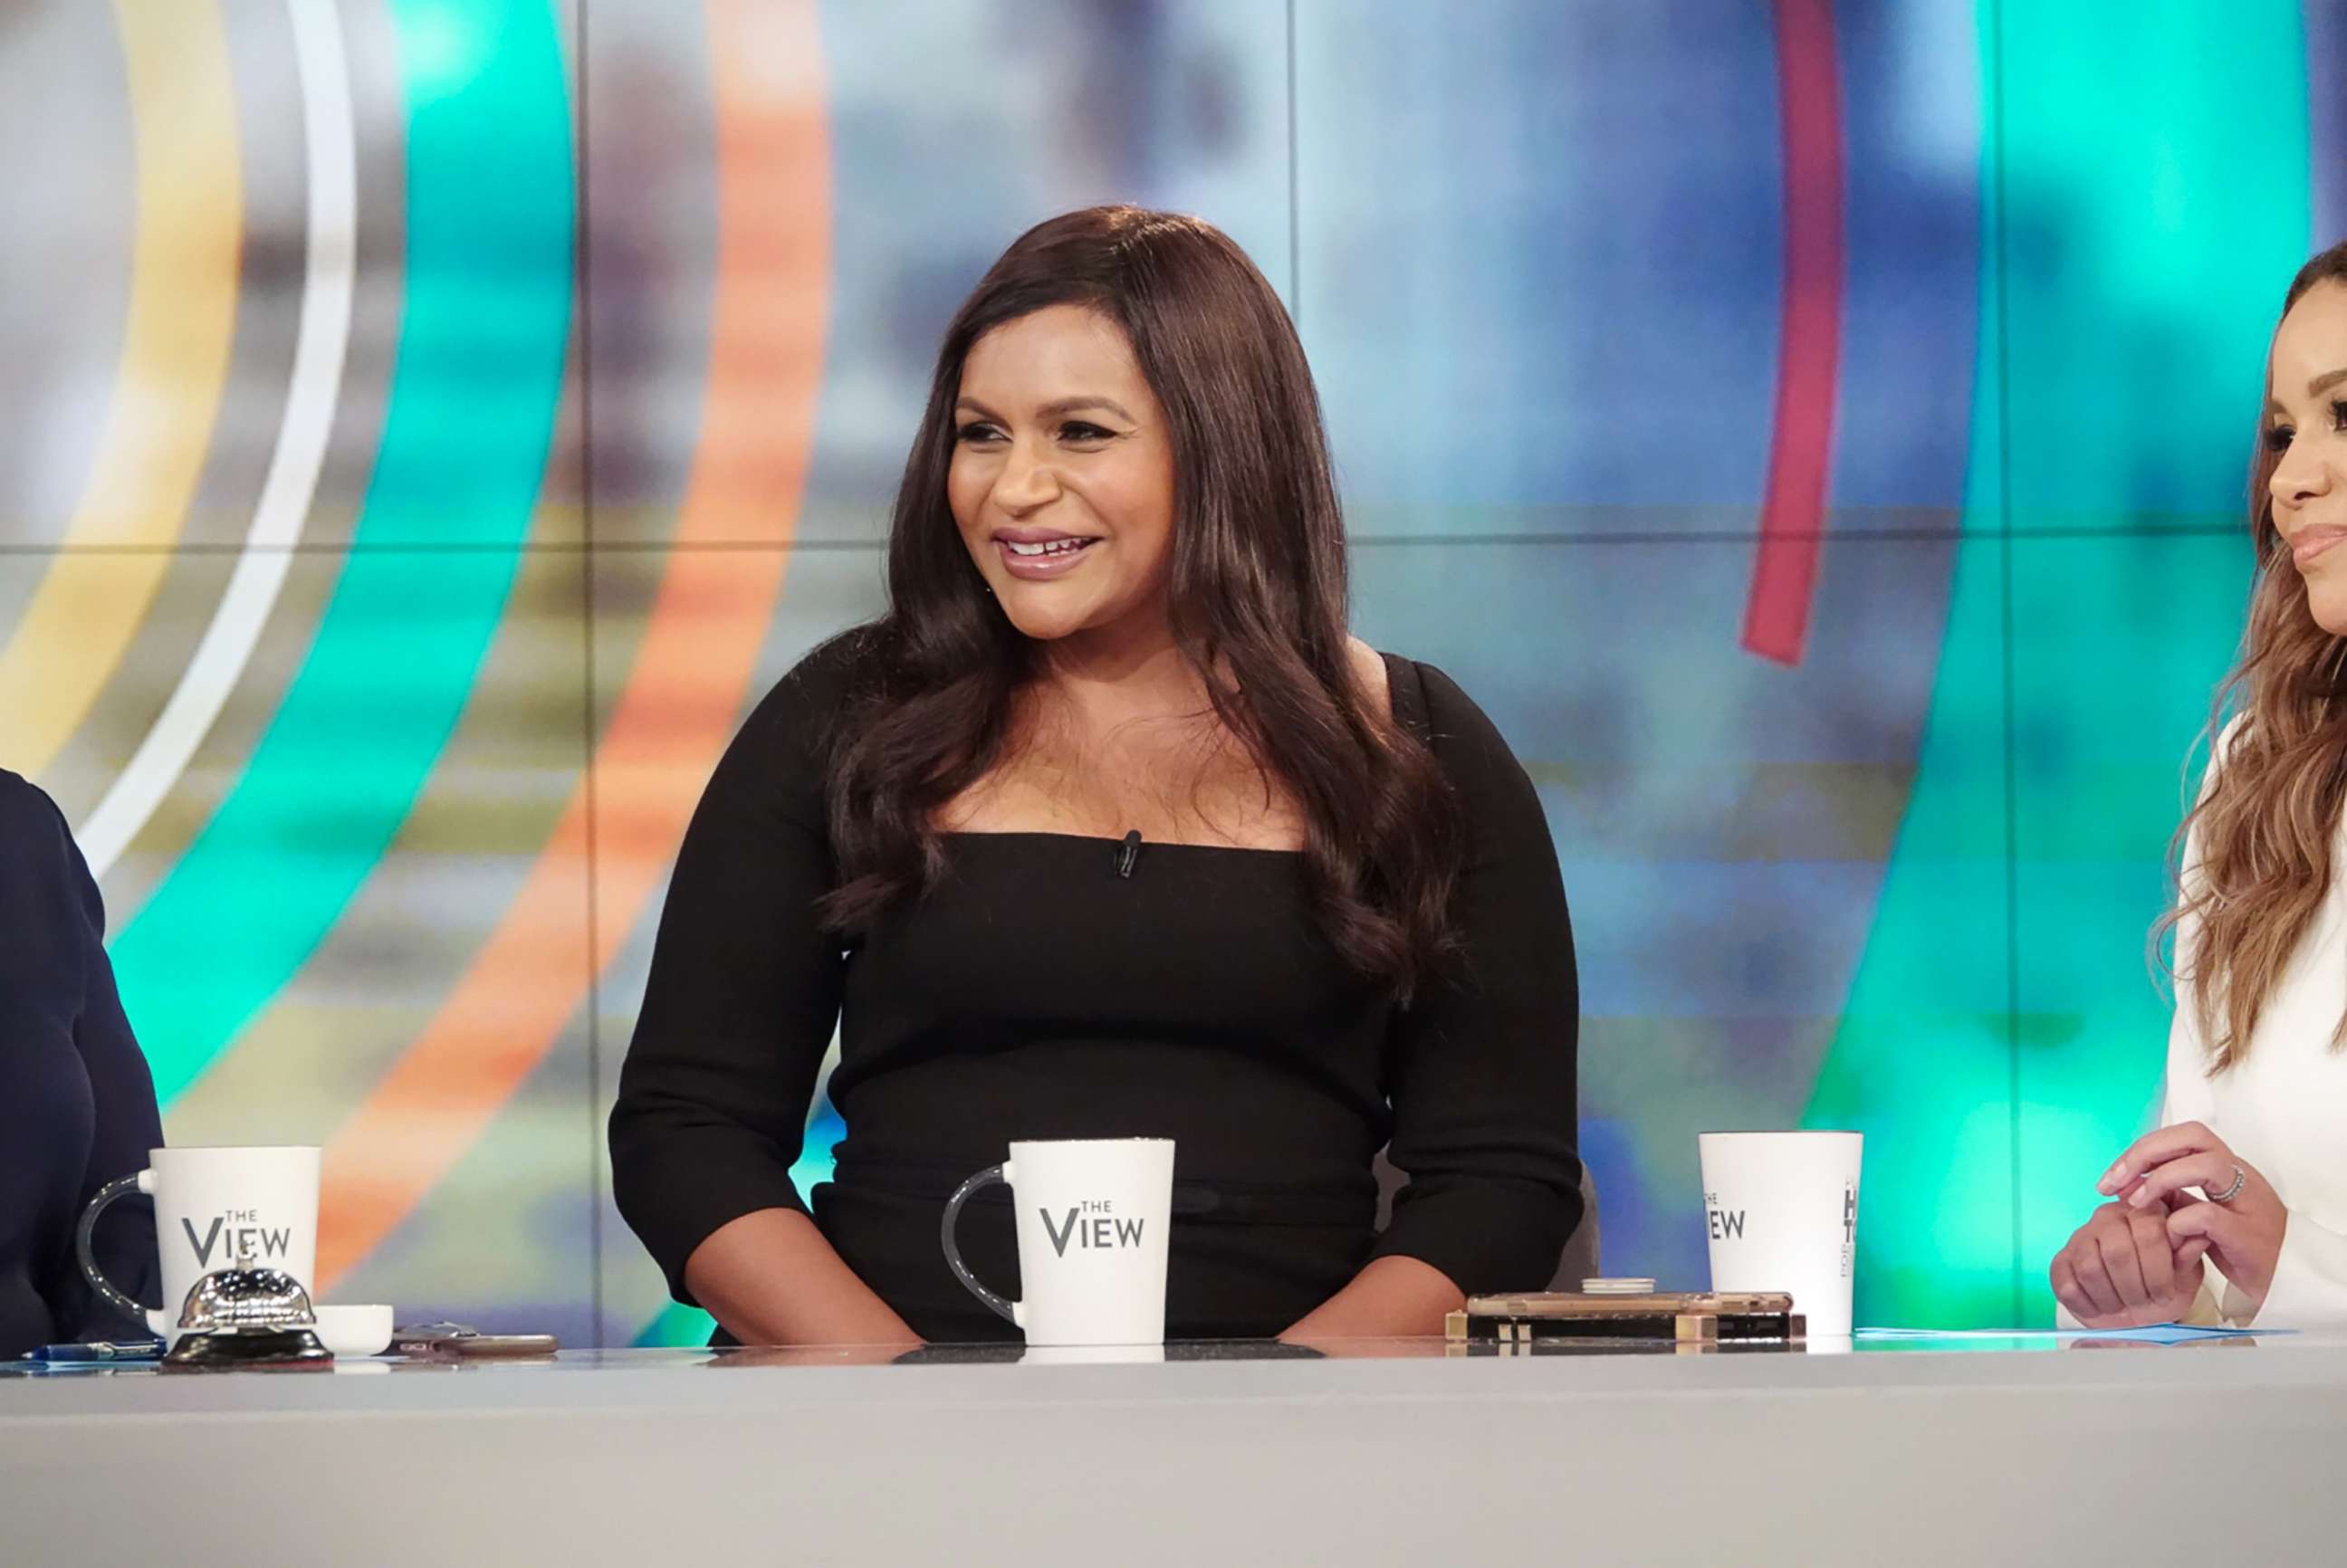 PHOTO: Mindy Kaling joins "The View" on Friday, June 7, 2019.